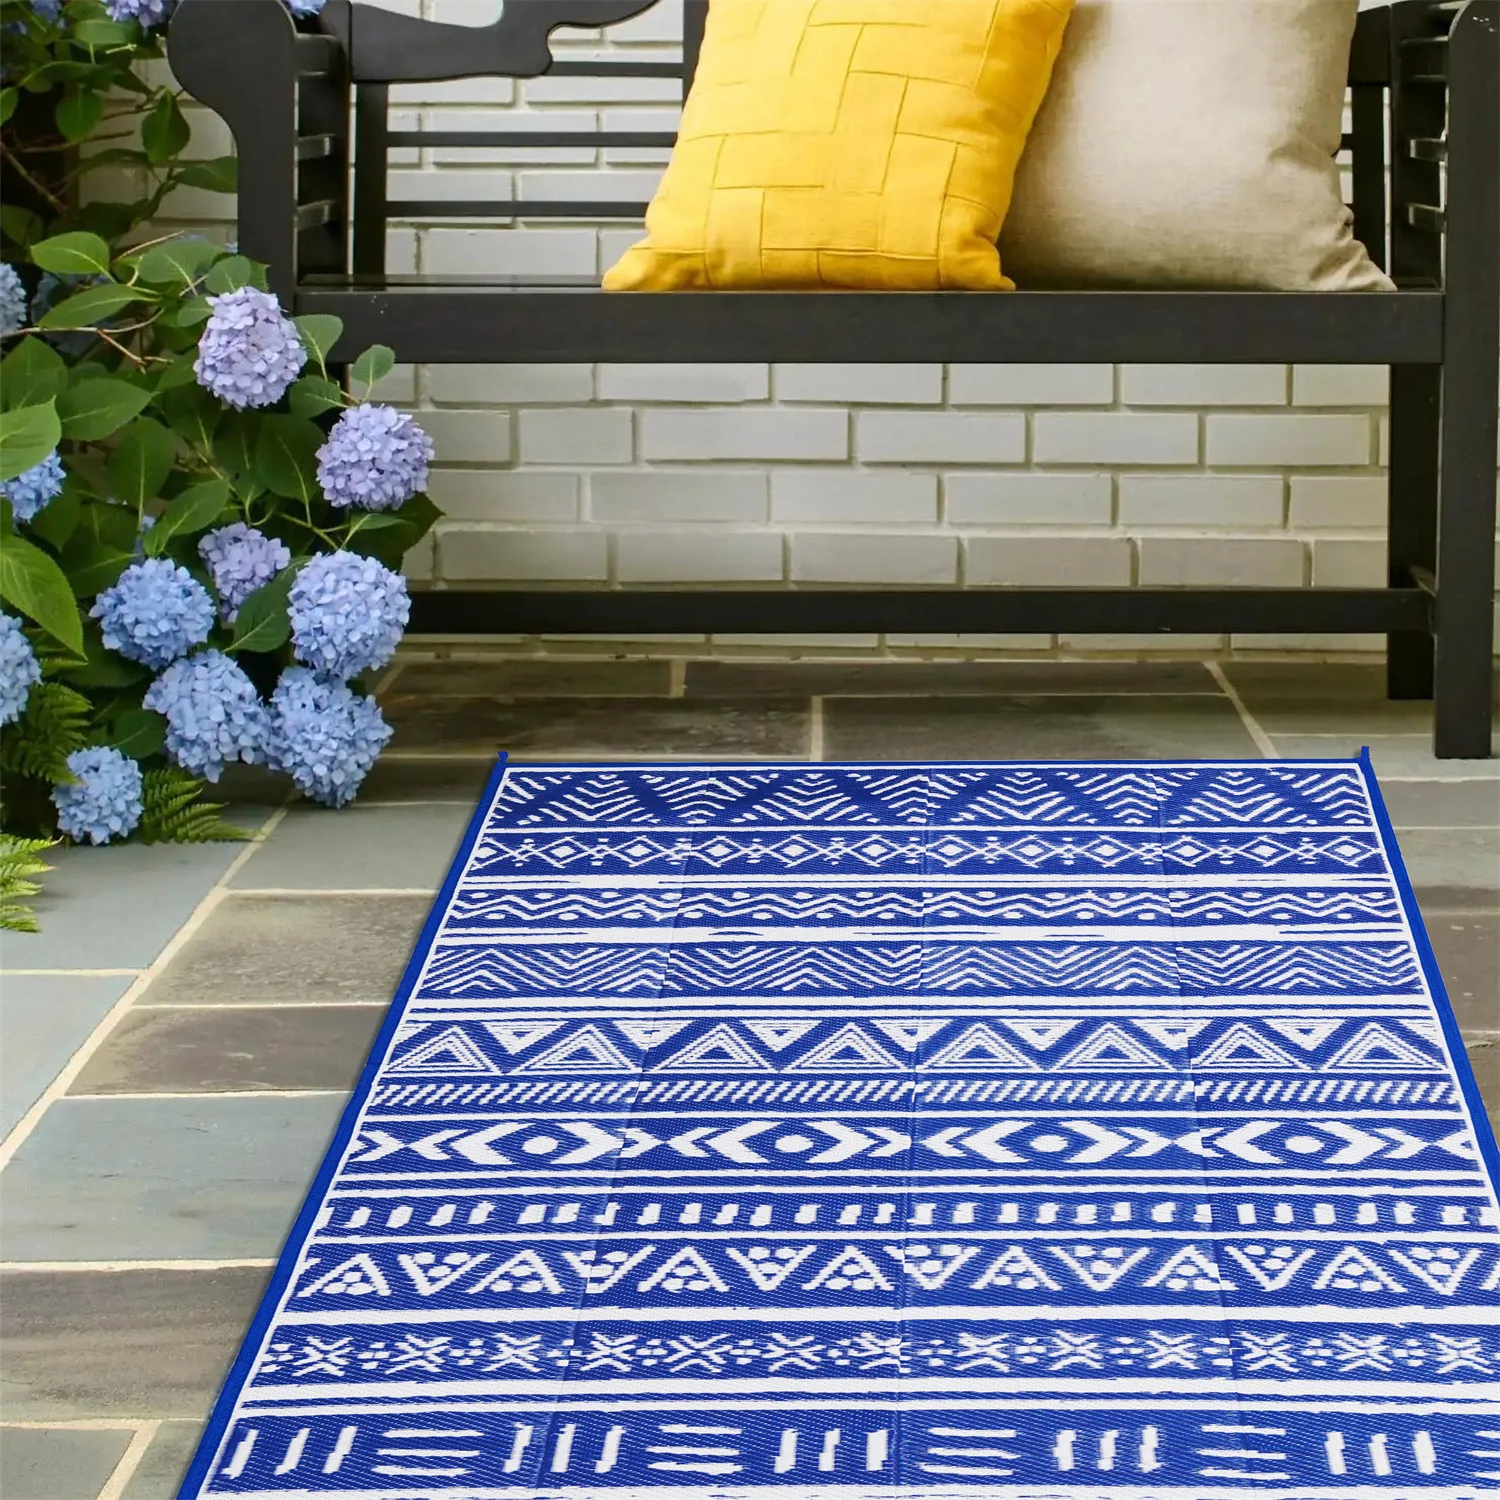 Znz Custom Large PP Foldable Waterproof Woven RV Patio Outdoor Rug